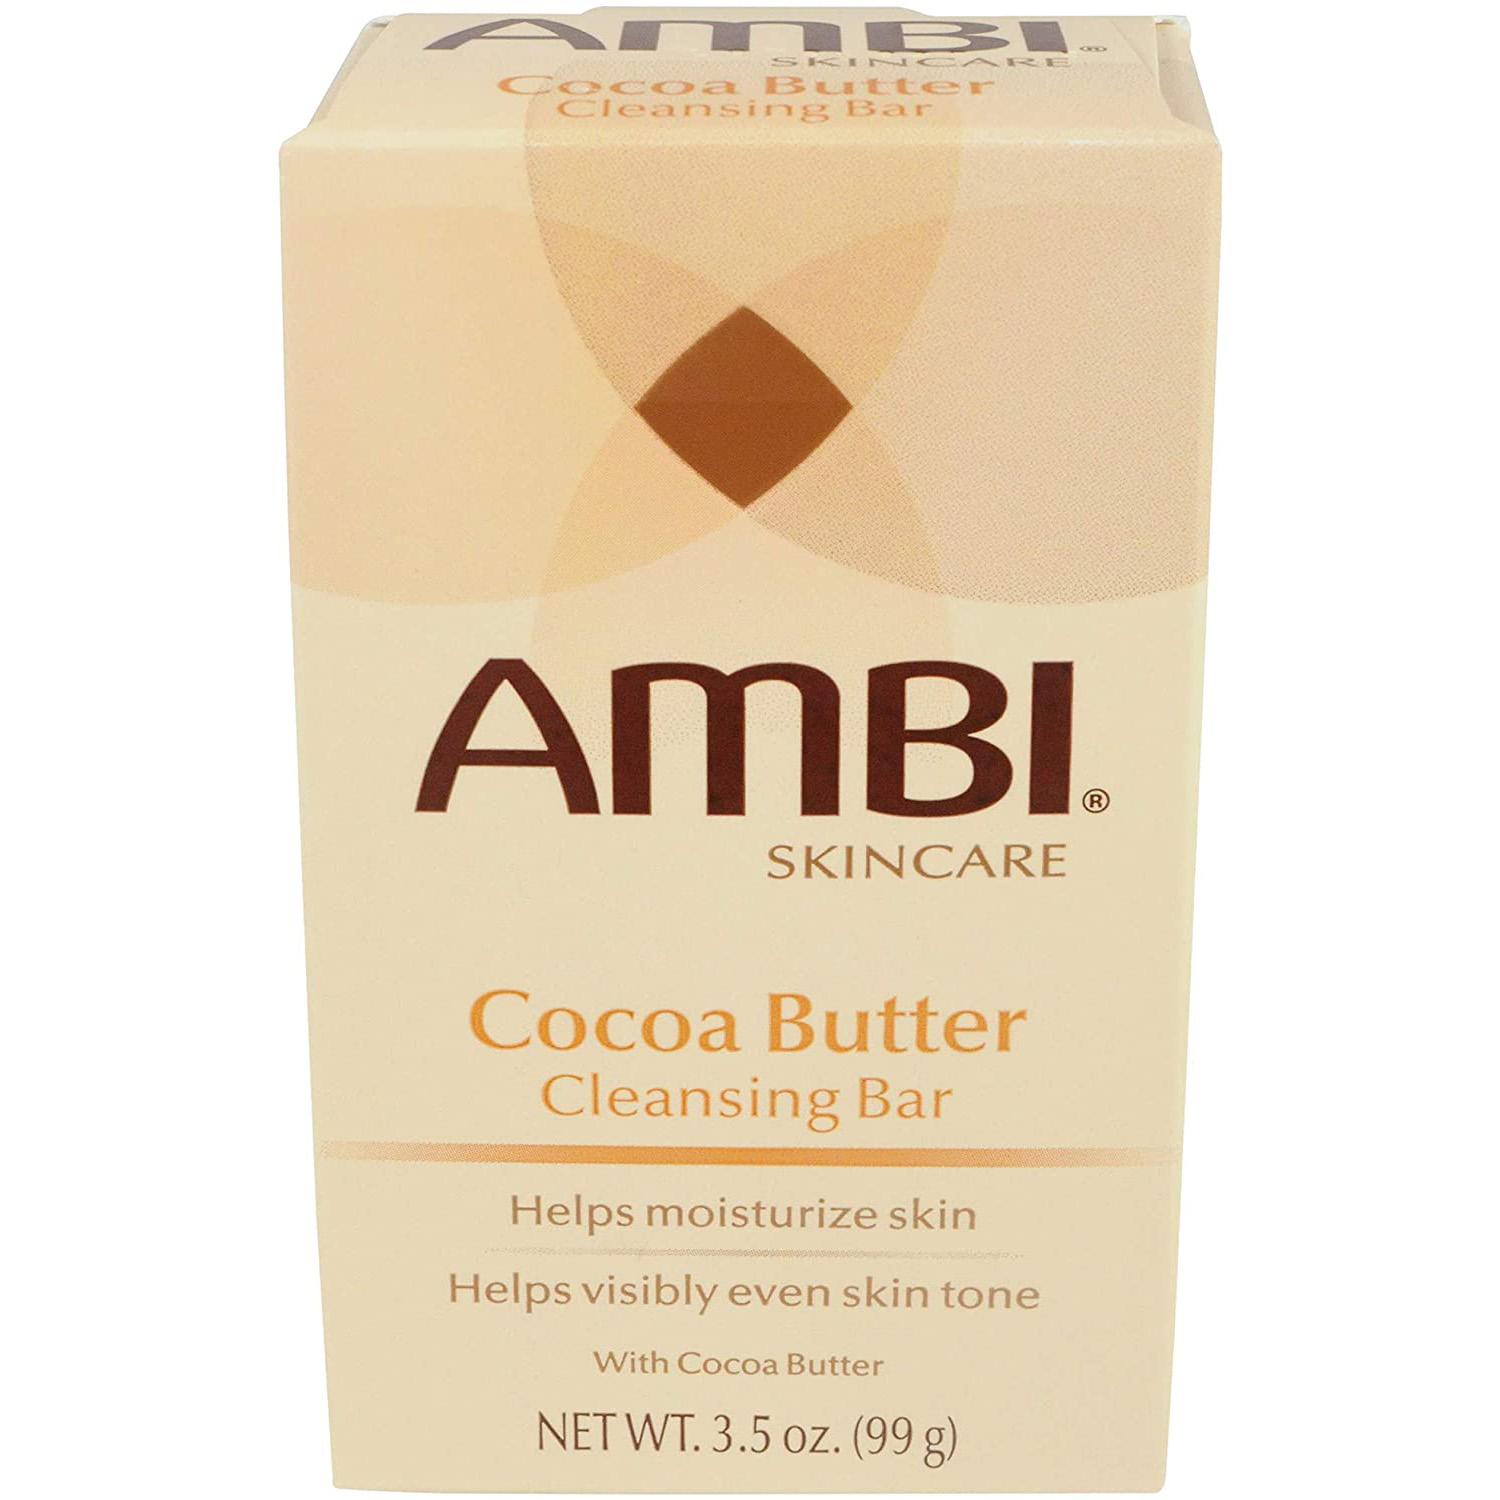 Ambi Skin Care Cleansing Bar for $1.49